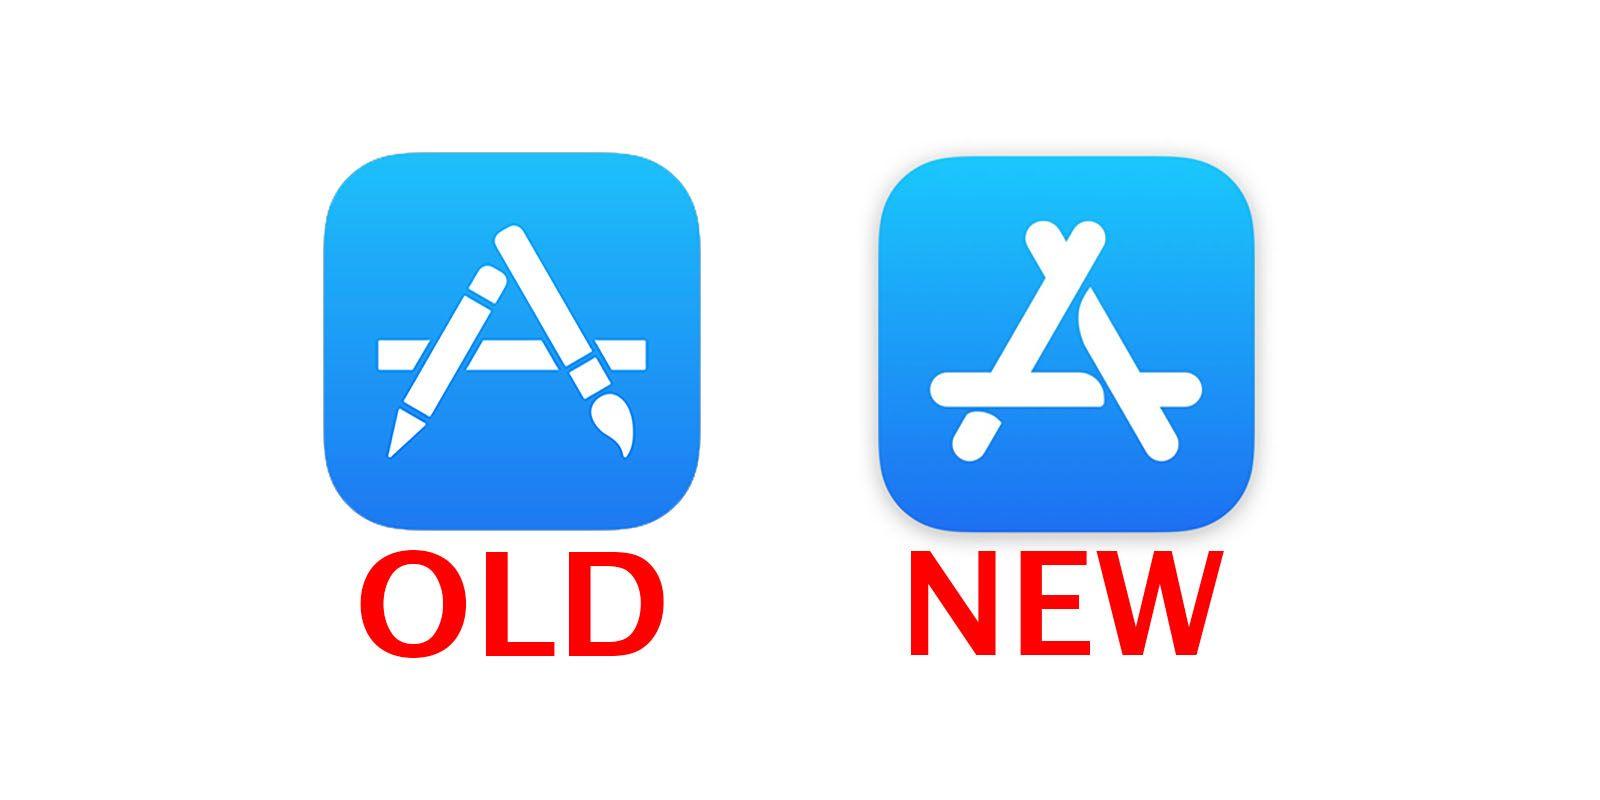 App Store Logo - Apple just changed the App Store icon for the first time in years